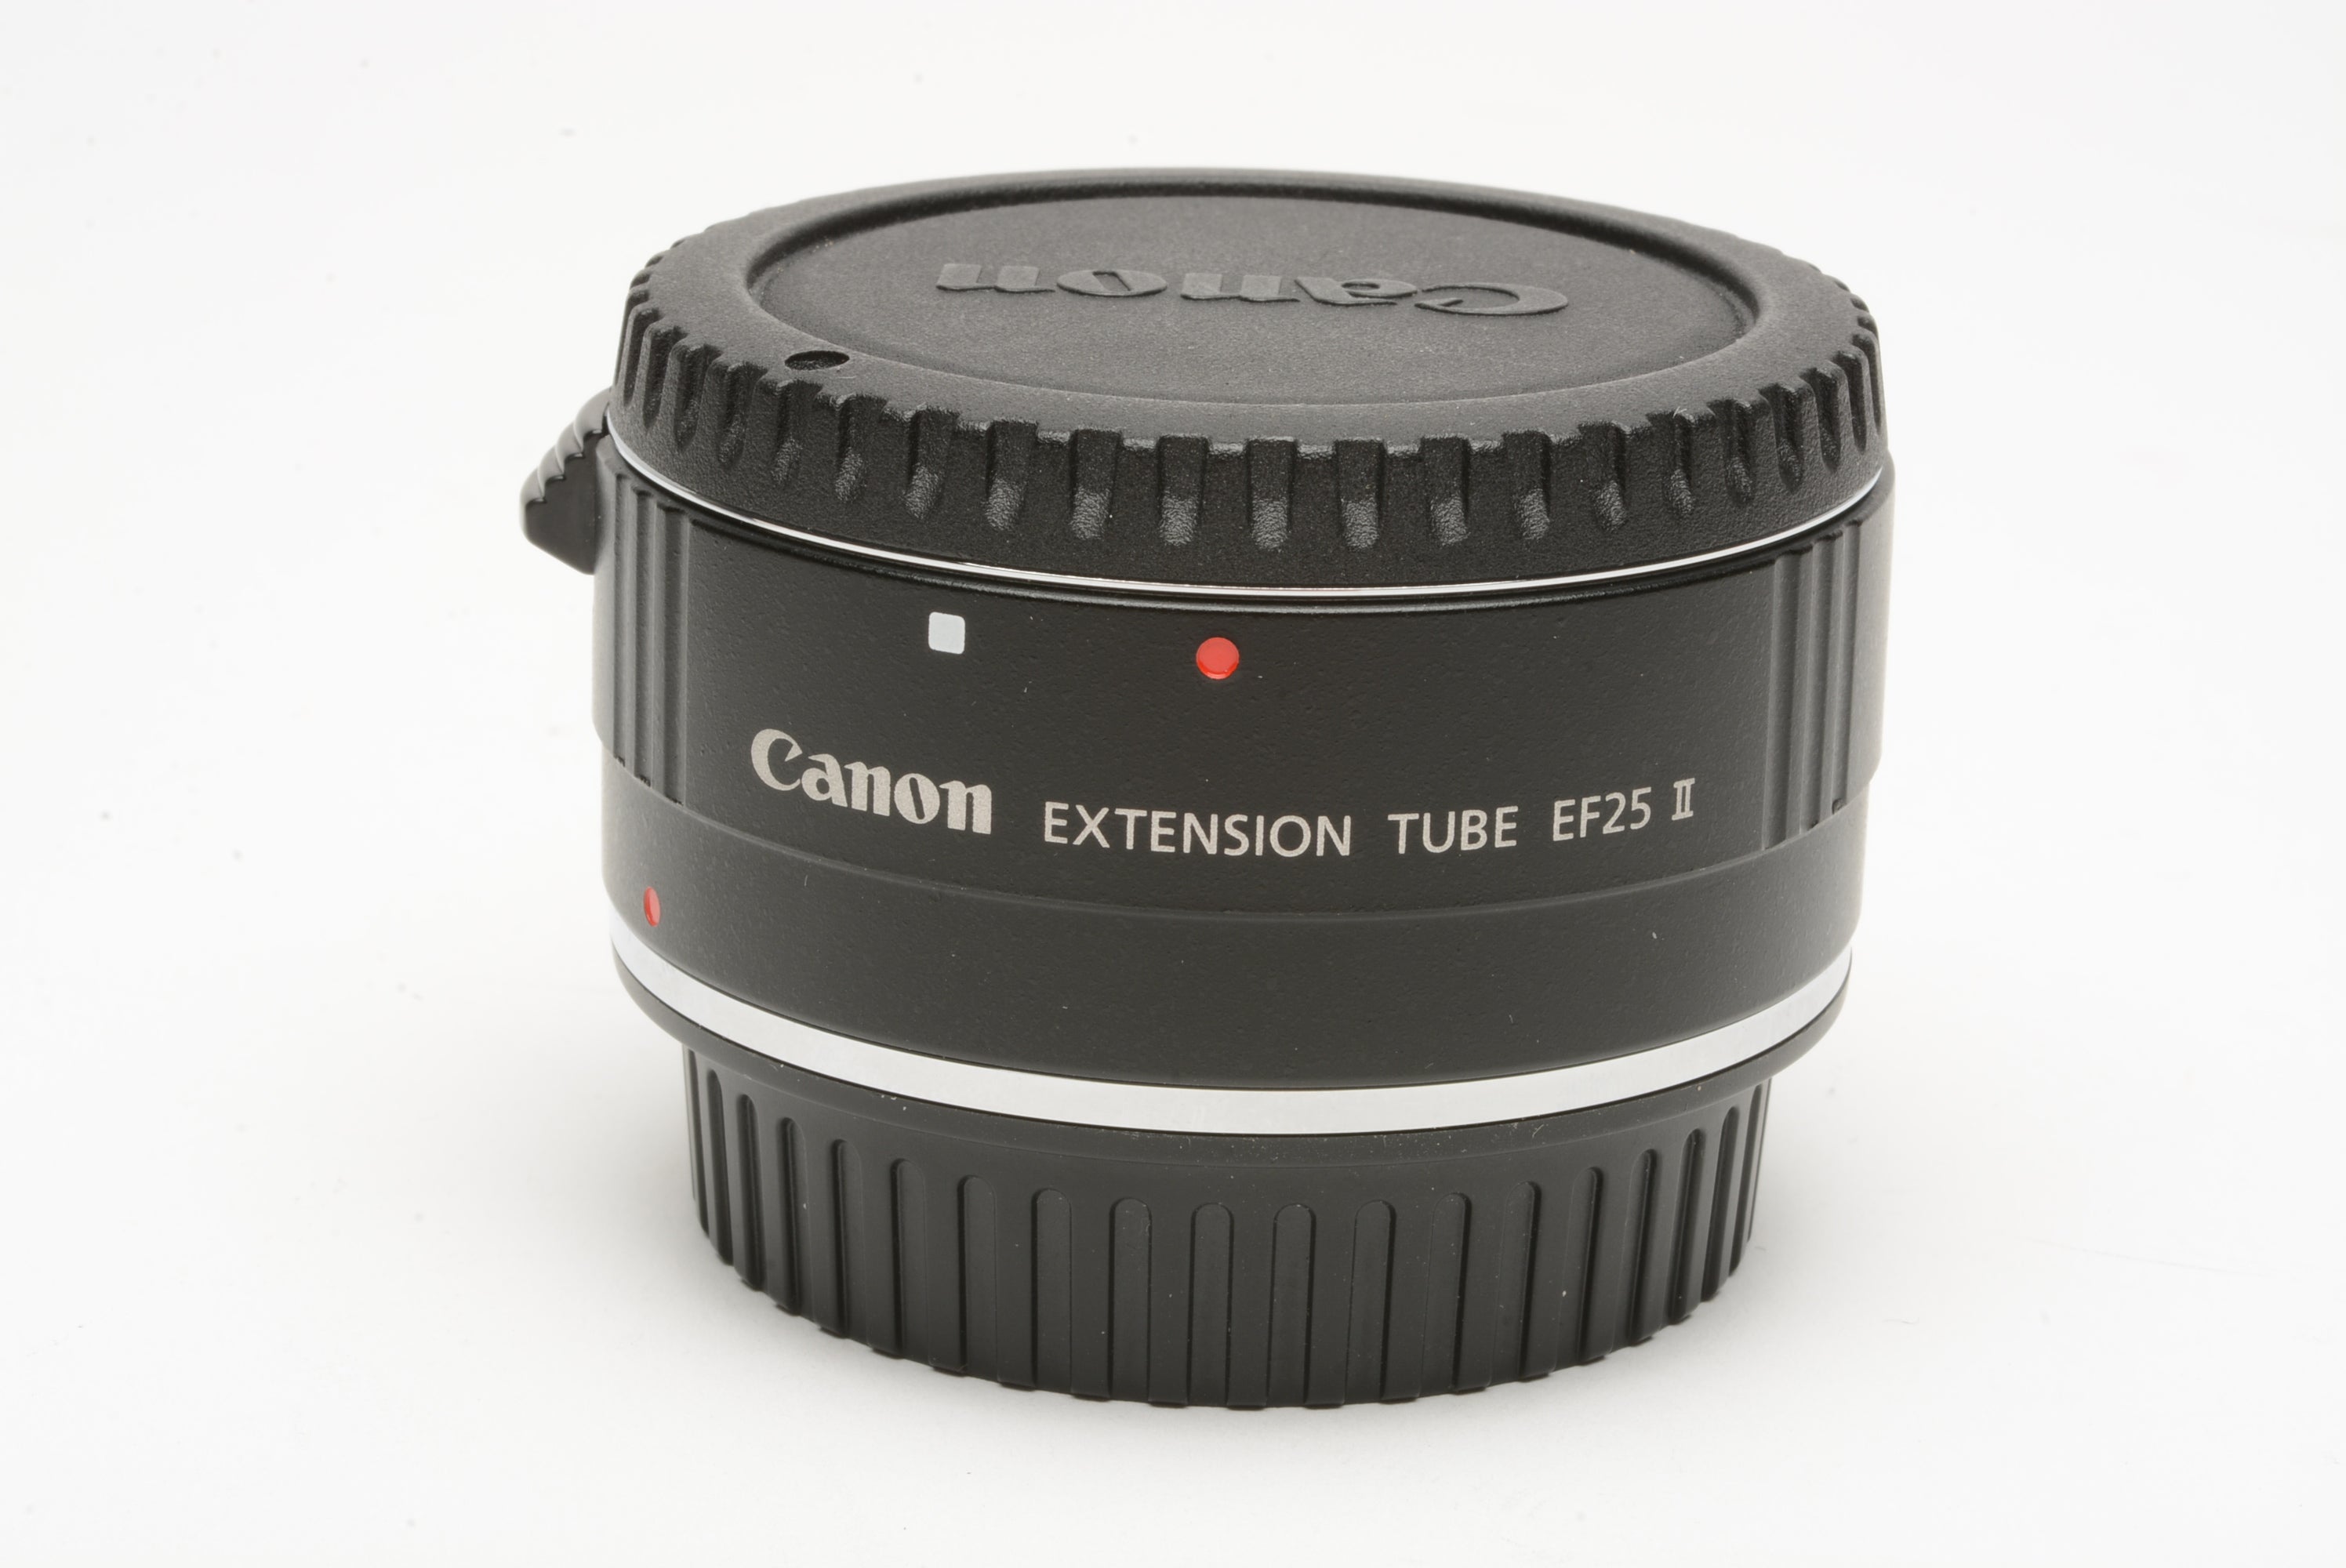 Canon EF25 II Extension tube, Mint in box, barely used – RecycledPhoto